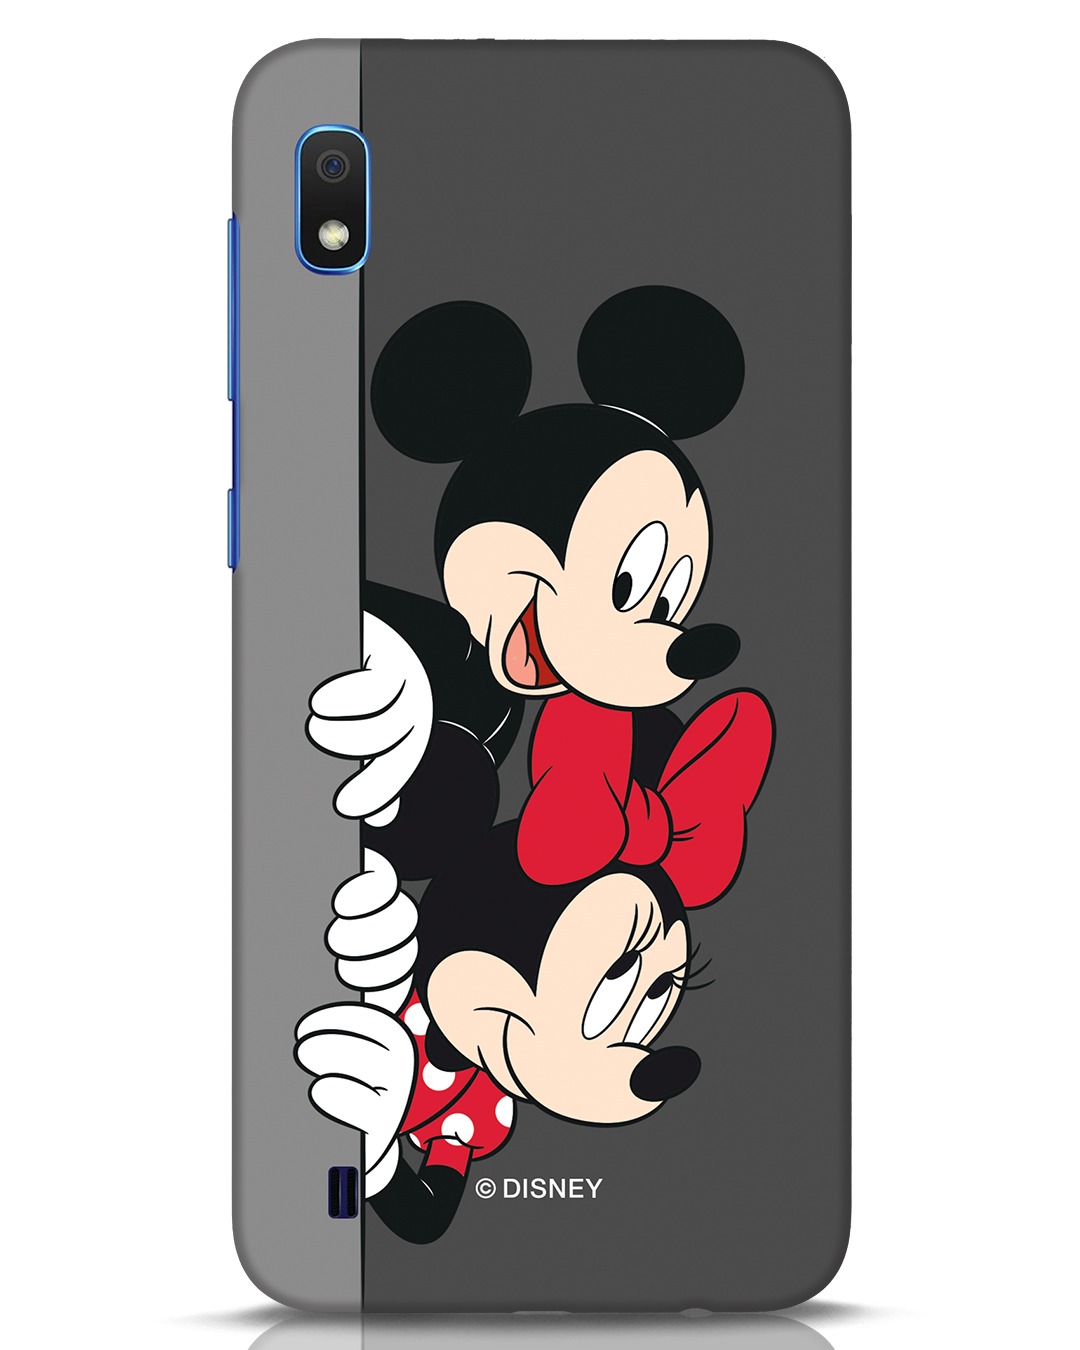 Buy Mickey And Minnie Samsung Galaxy A10 Mobile Cover For Unisex Online At Bewakoof 0472